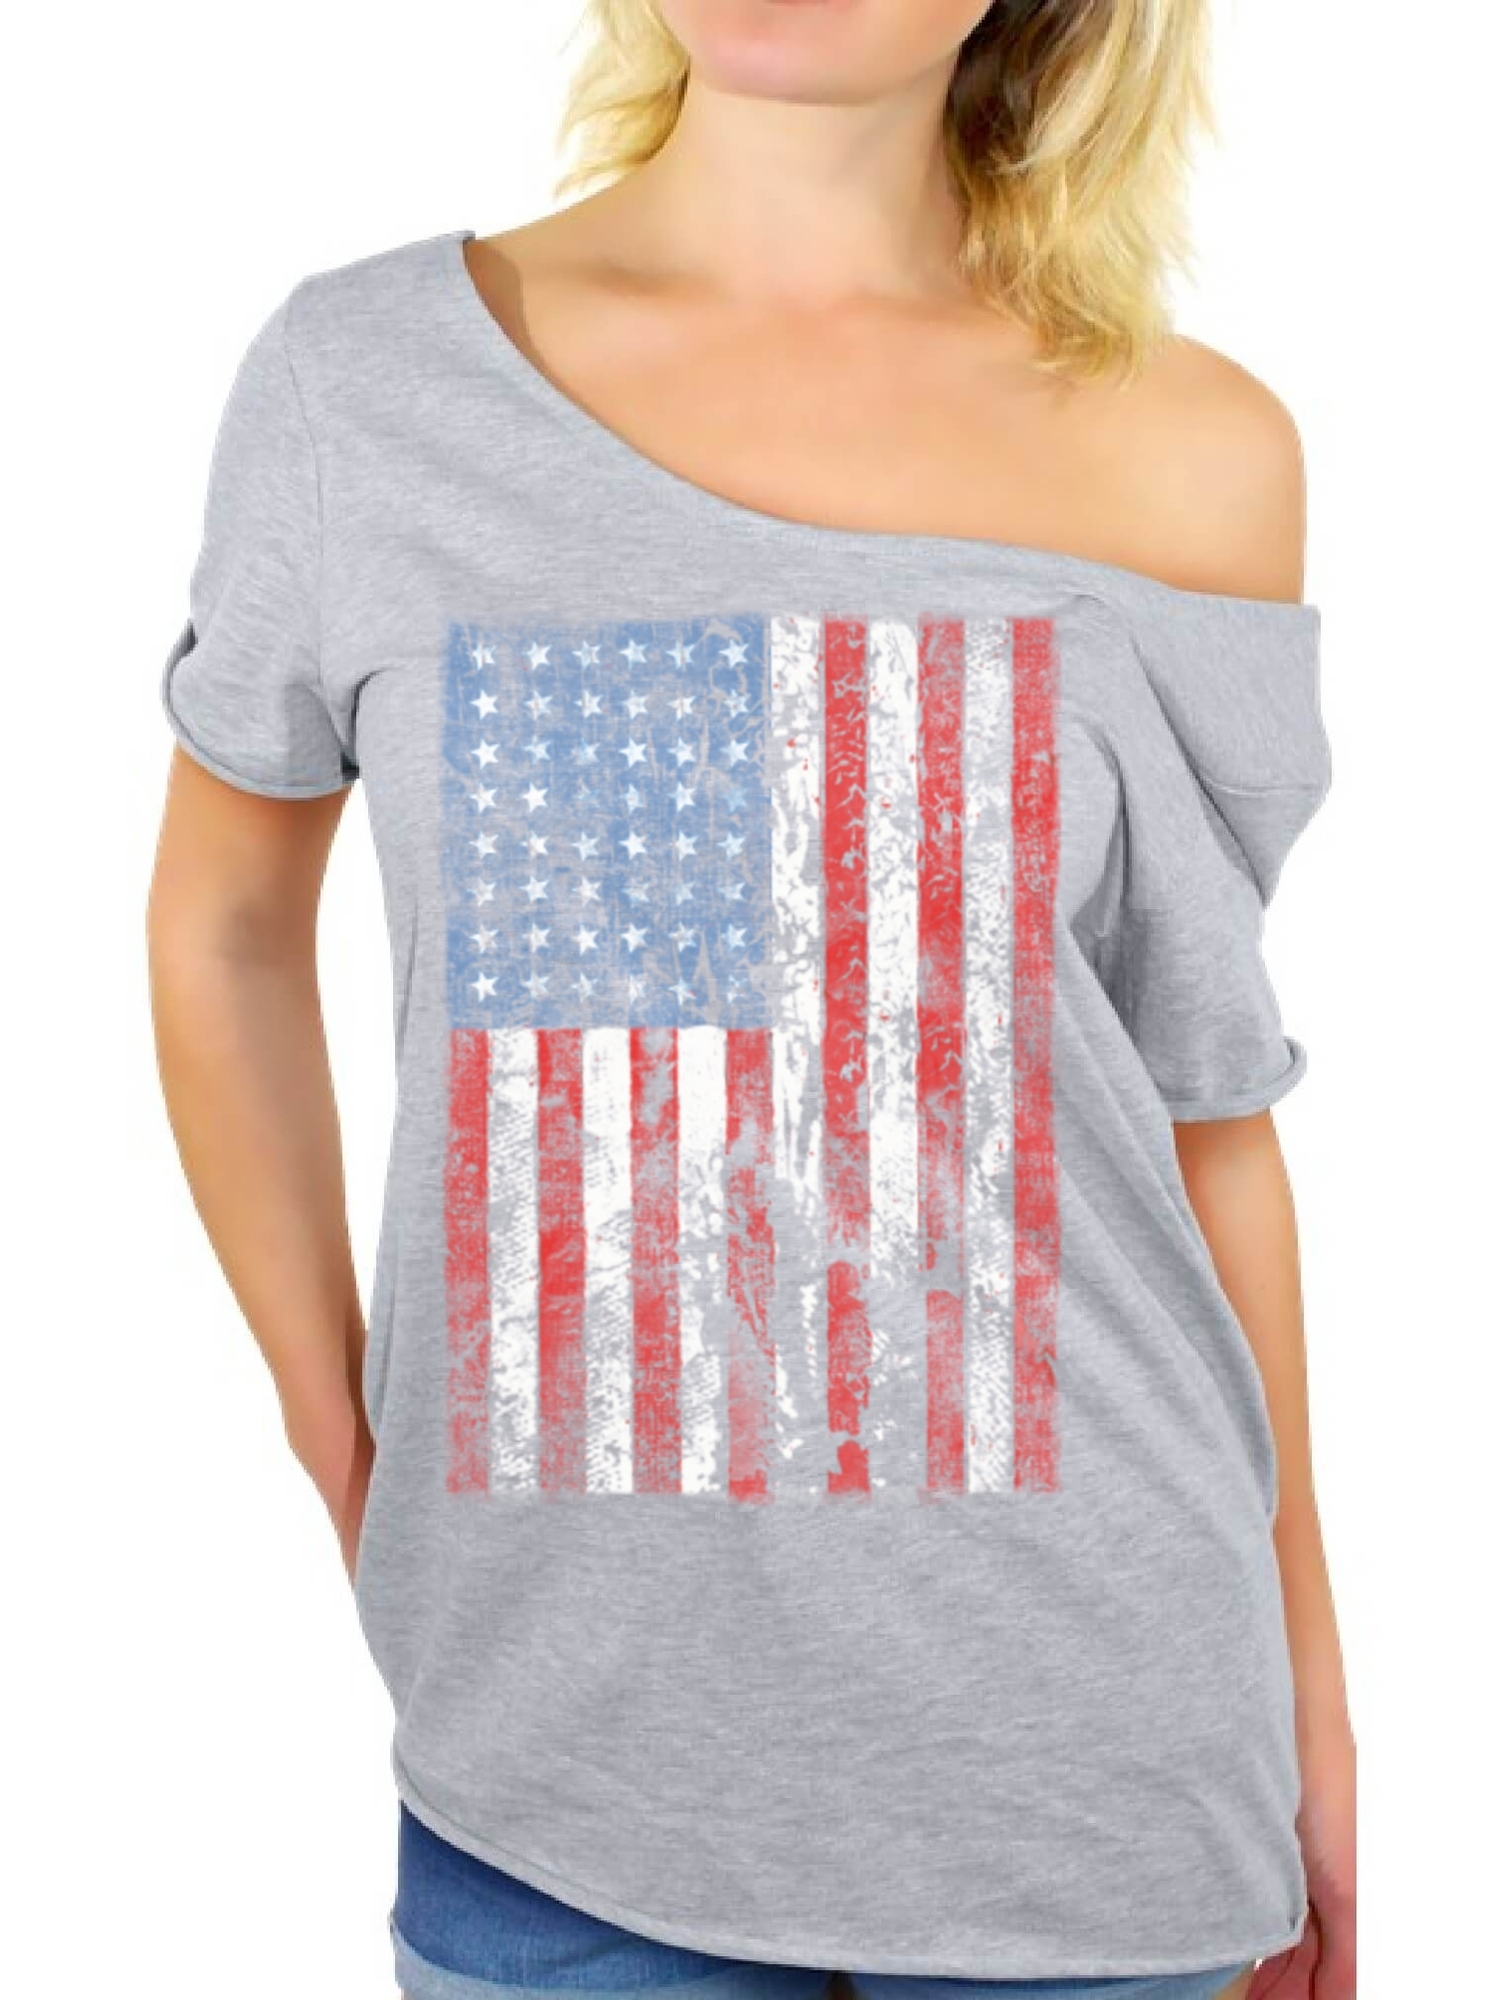 Awkward Styles American Flag Off the Shoulder T Shirts for Women USA Shirt Womens Patriotic Outfit USA Flag T Shirts 4th of July Tshirt Tops Independence Day Gifts USA Tee Shirts for Women - image 1 of 4